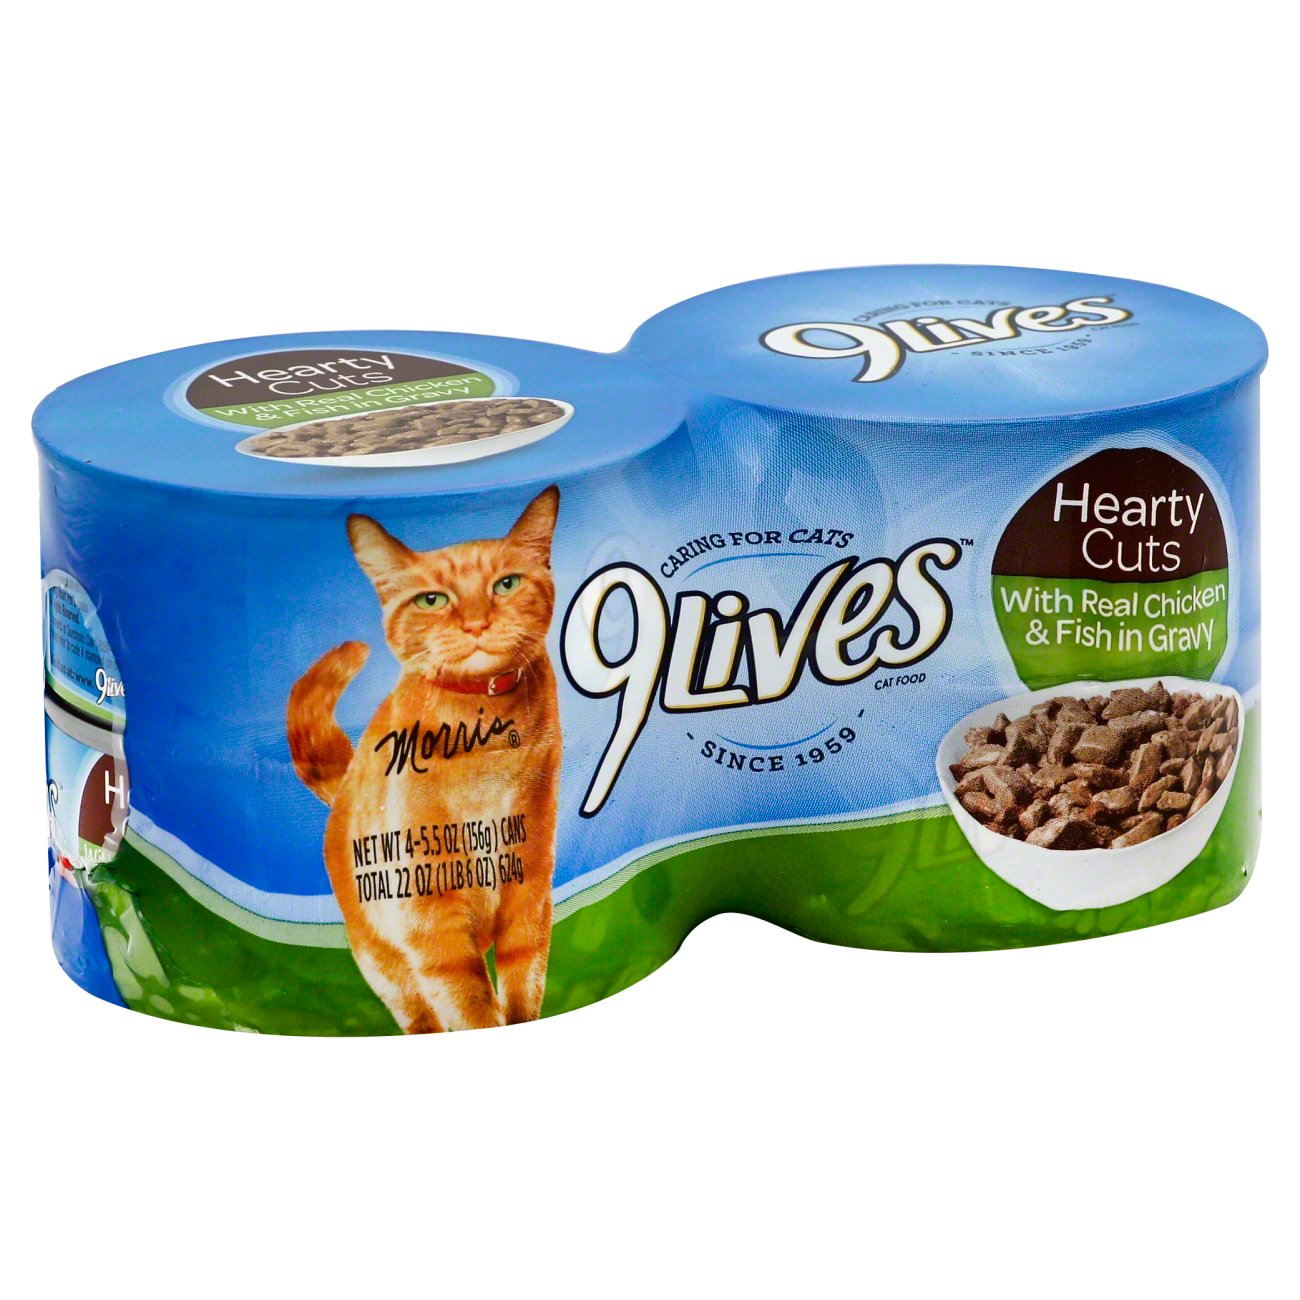 9Lives Hearty Cuts with Real Chicken & Fish in Gravy Cat Food Shop